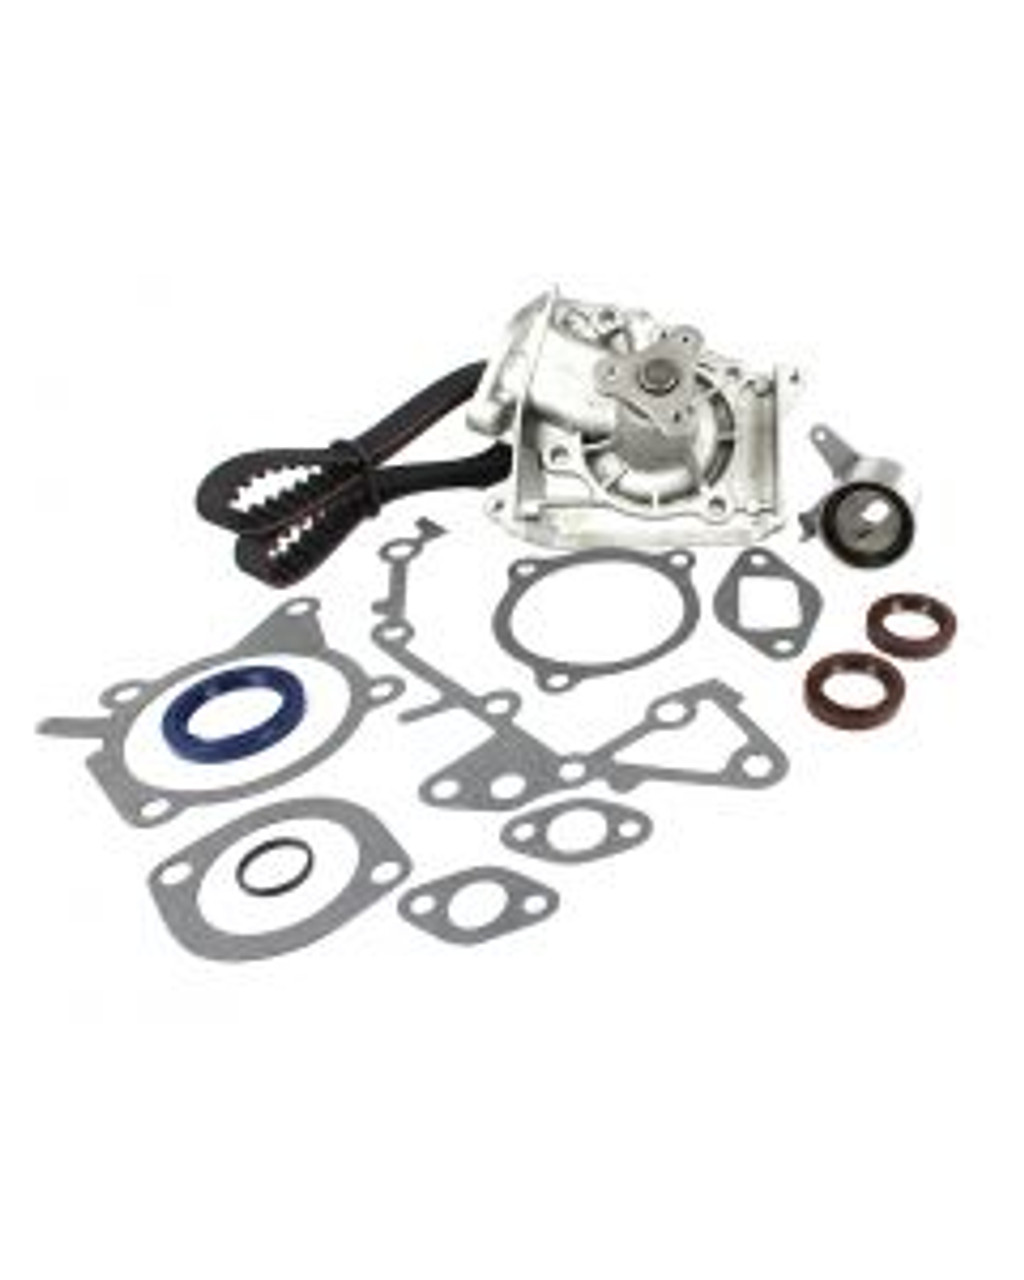 Timing Belt Kit with Water Pump 1.6L 1991 Mazda 323 - TBK451WP.10